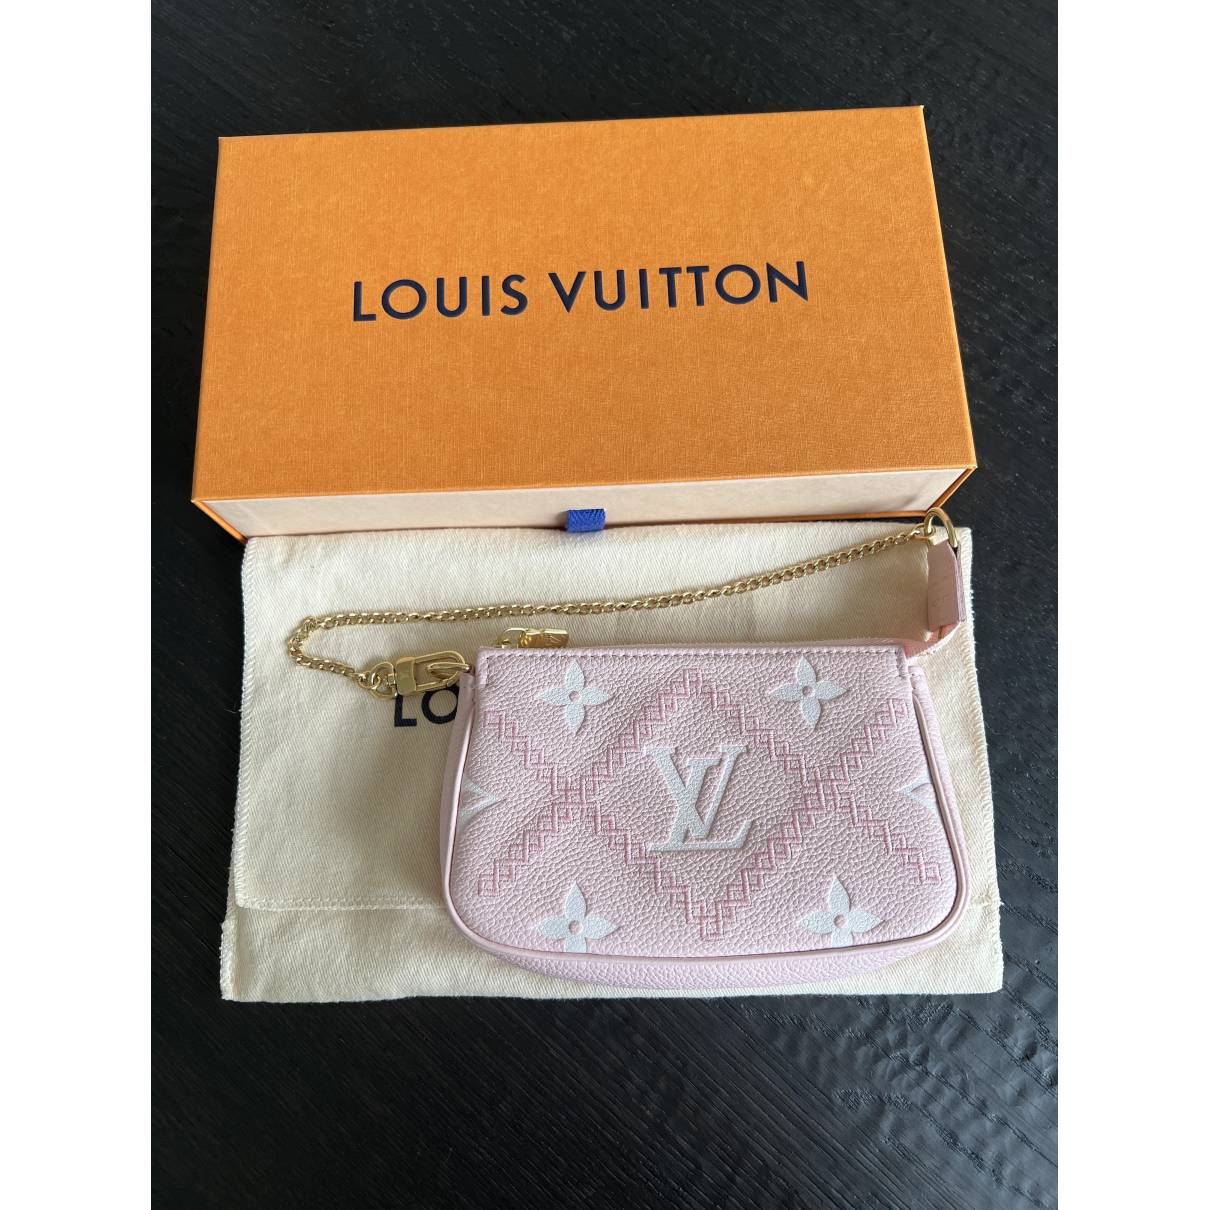 Louis Vuitton - Authenticated Handbag - Cloth Pink for Women, Very Good Condition